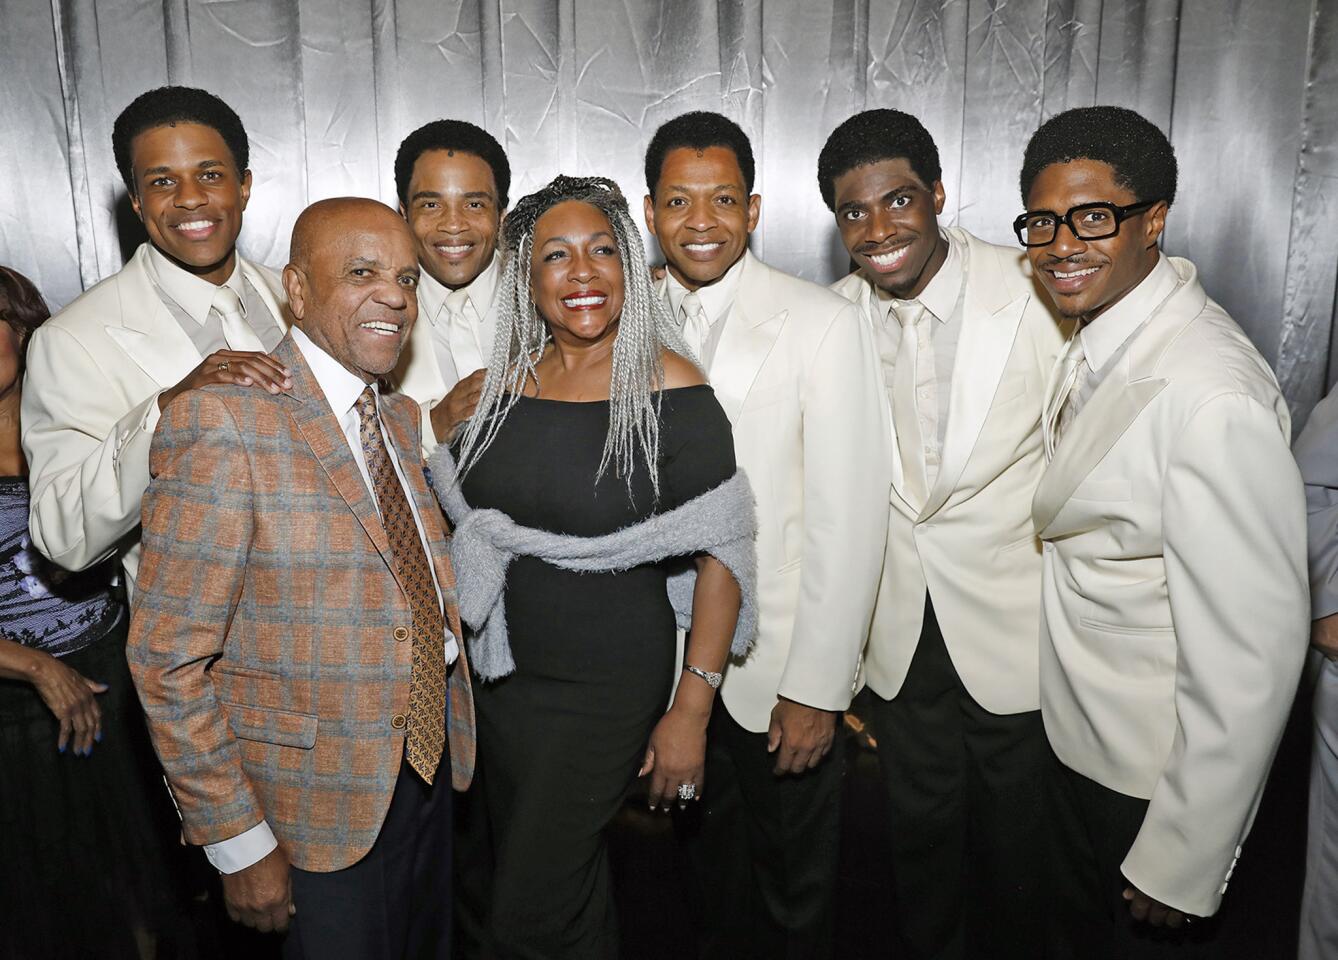 Backstage after the opening night performance of "Ain't Too Proud - The Life and Times of the Temptations" are Berry Gordy, founder of Motown label and Mary Wilson, original member of The Supremes, surrounded by cast members Jeremy Pope, James Harkness, Derrick Baskin, Jawan M. Jackson and Ephraim Sykes.